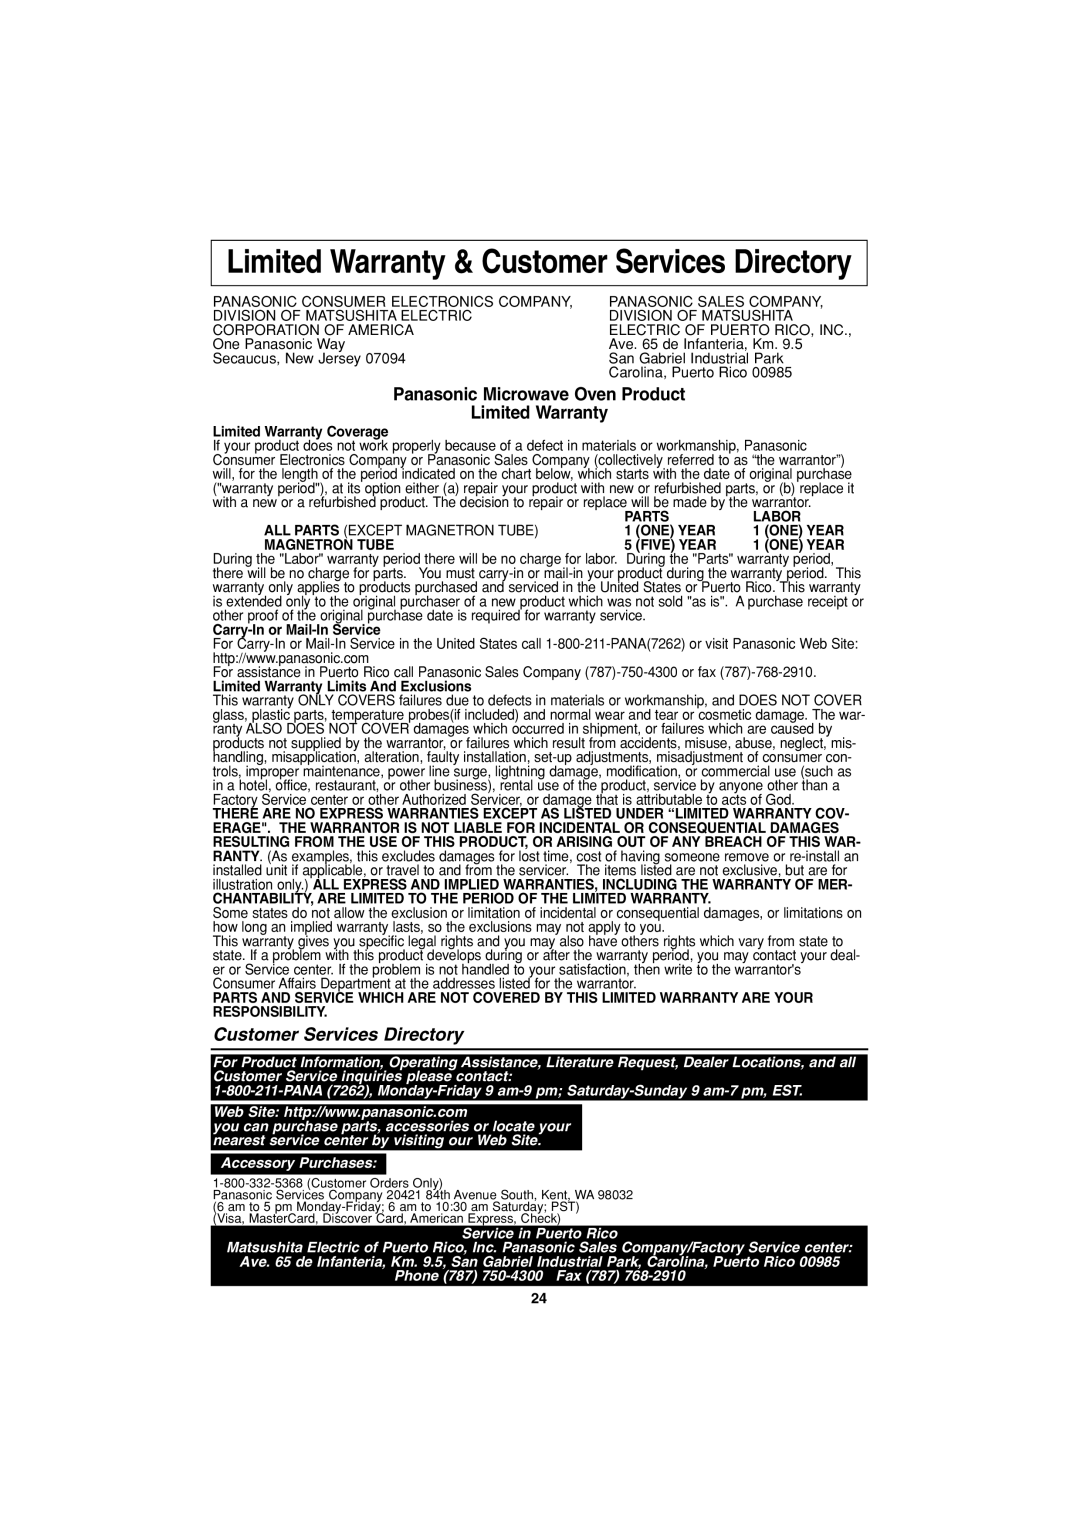 Panasonic NN-S753 Limited Warranty & Customer Services Directory, Panasonic Microwave Oven Product Limited Warranty 